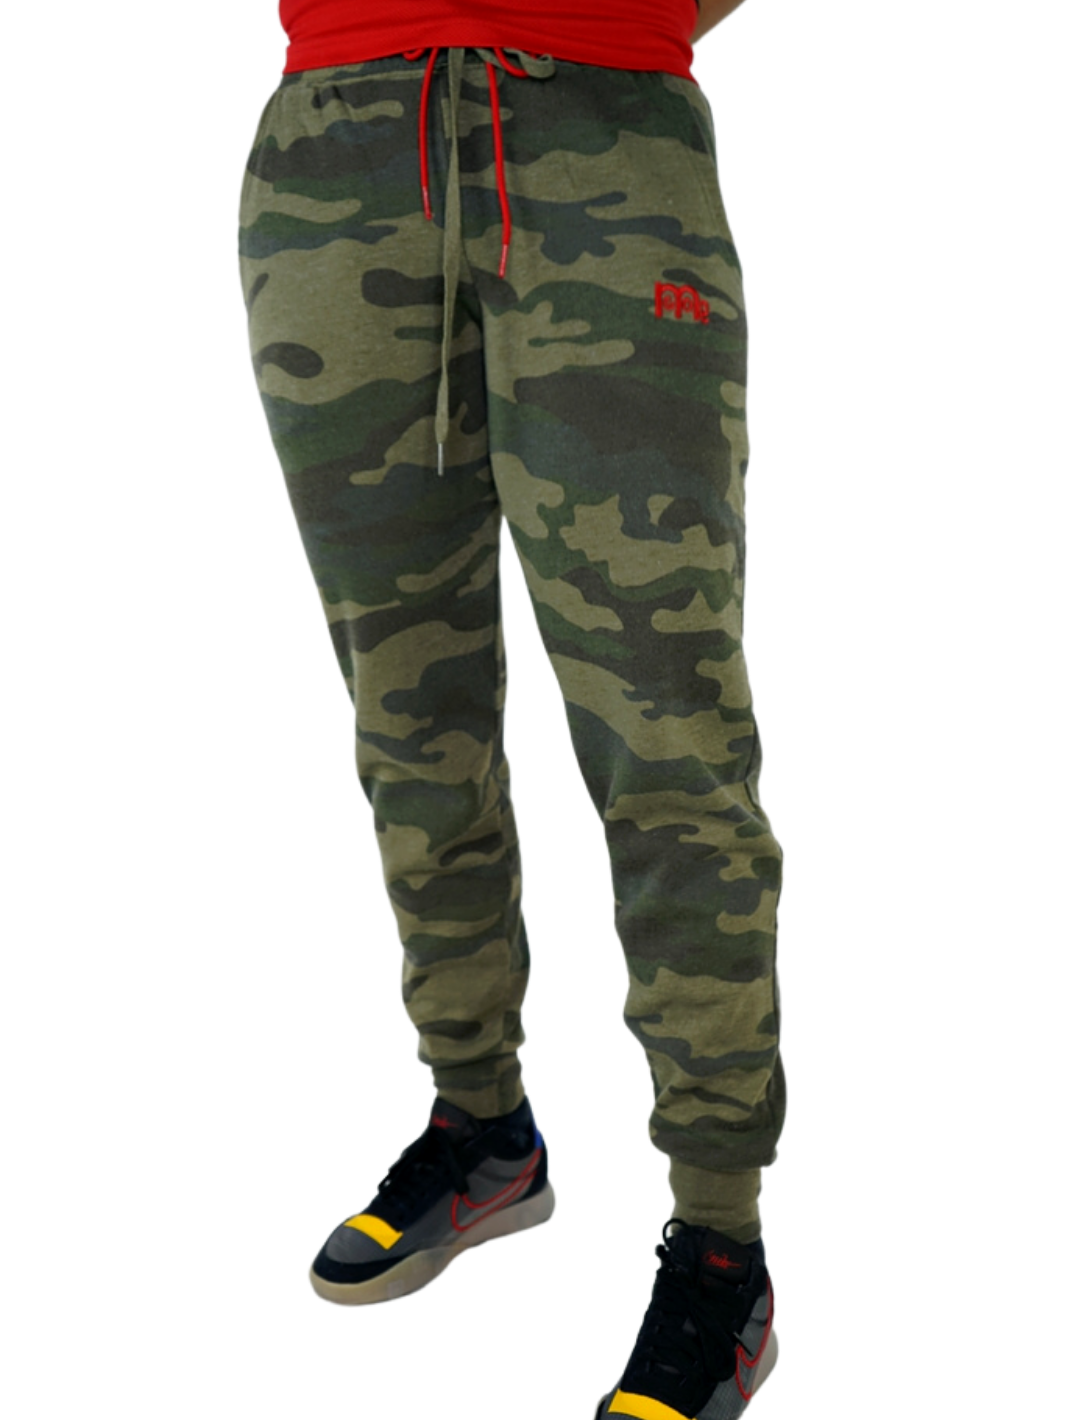 The perfect Green camouflage sweat pant material for your lounging needs. Featuring Red GODinme logo at left thigh, live in comfortable softness while representing your Faith!